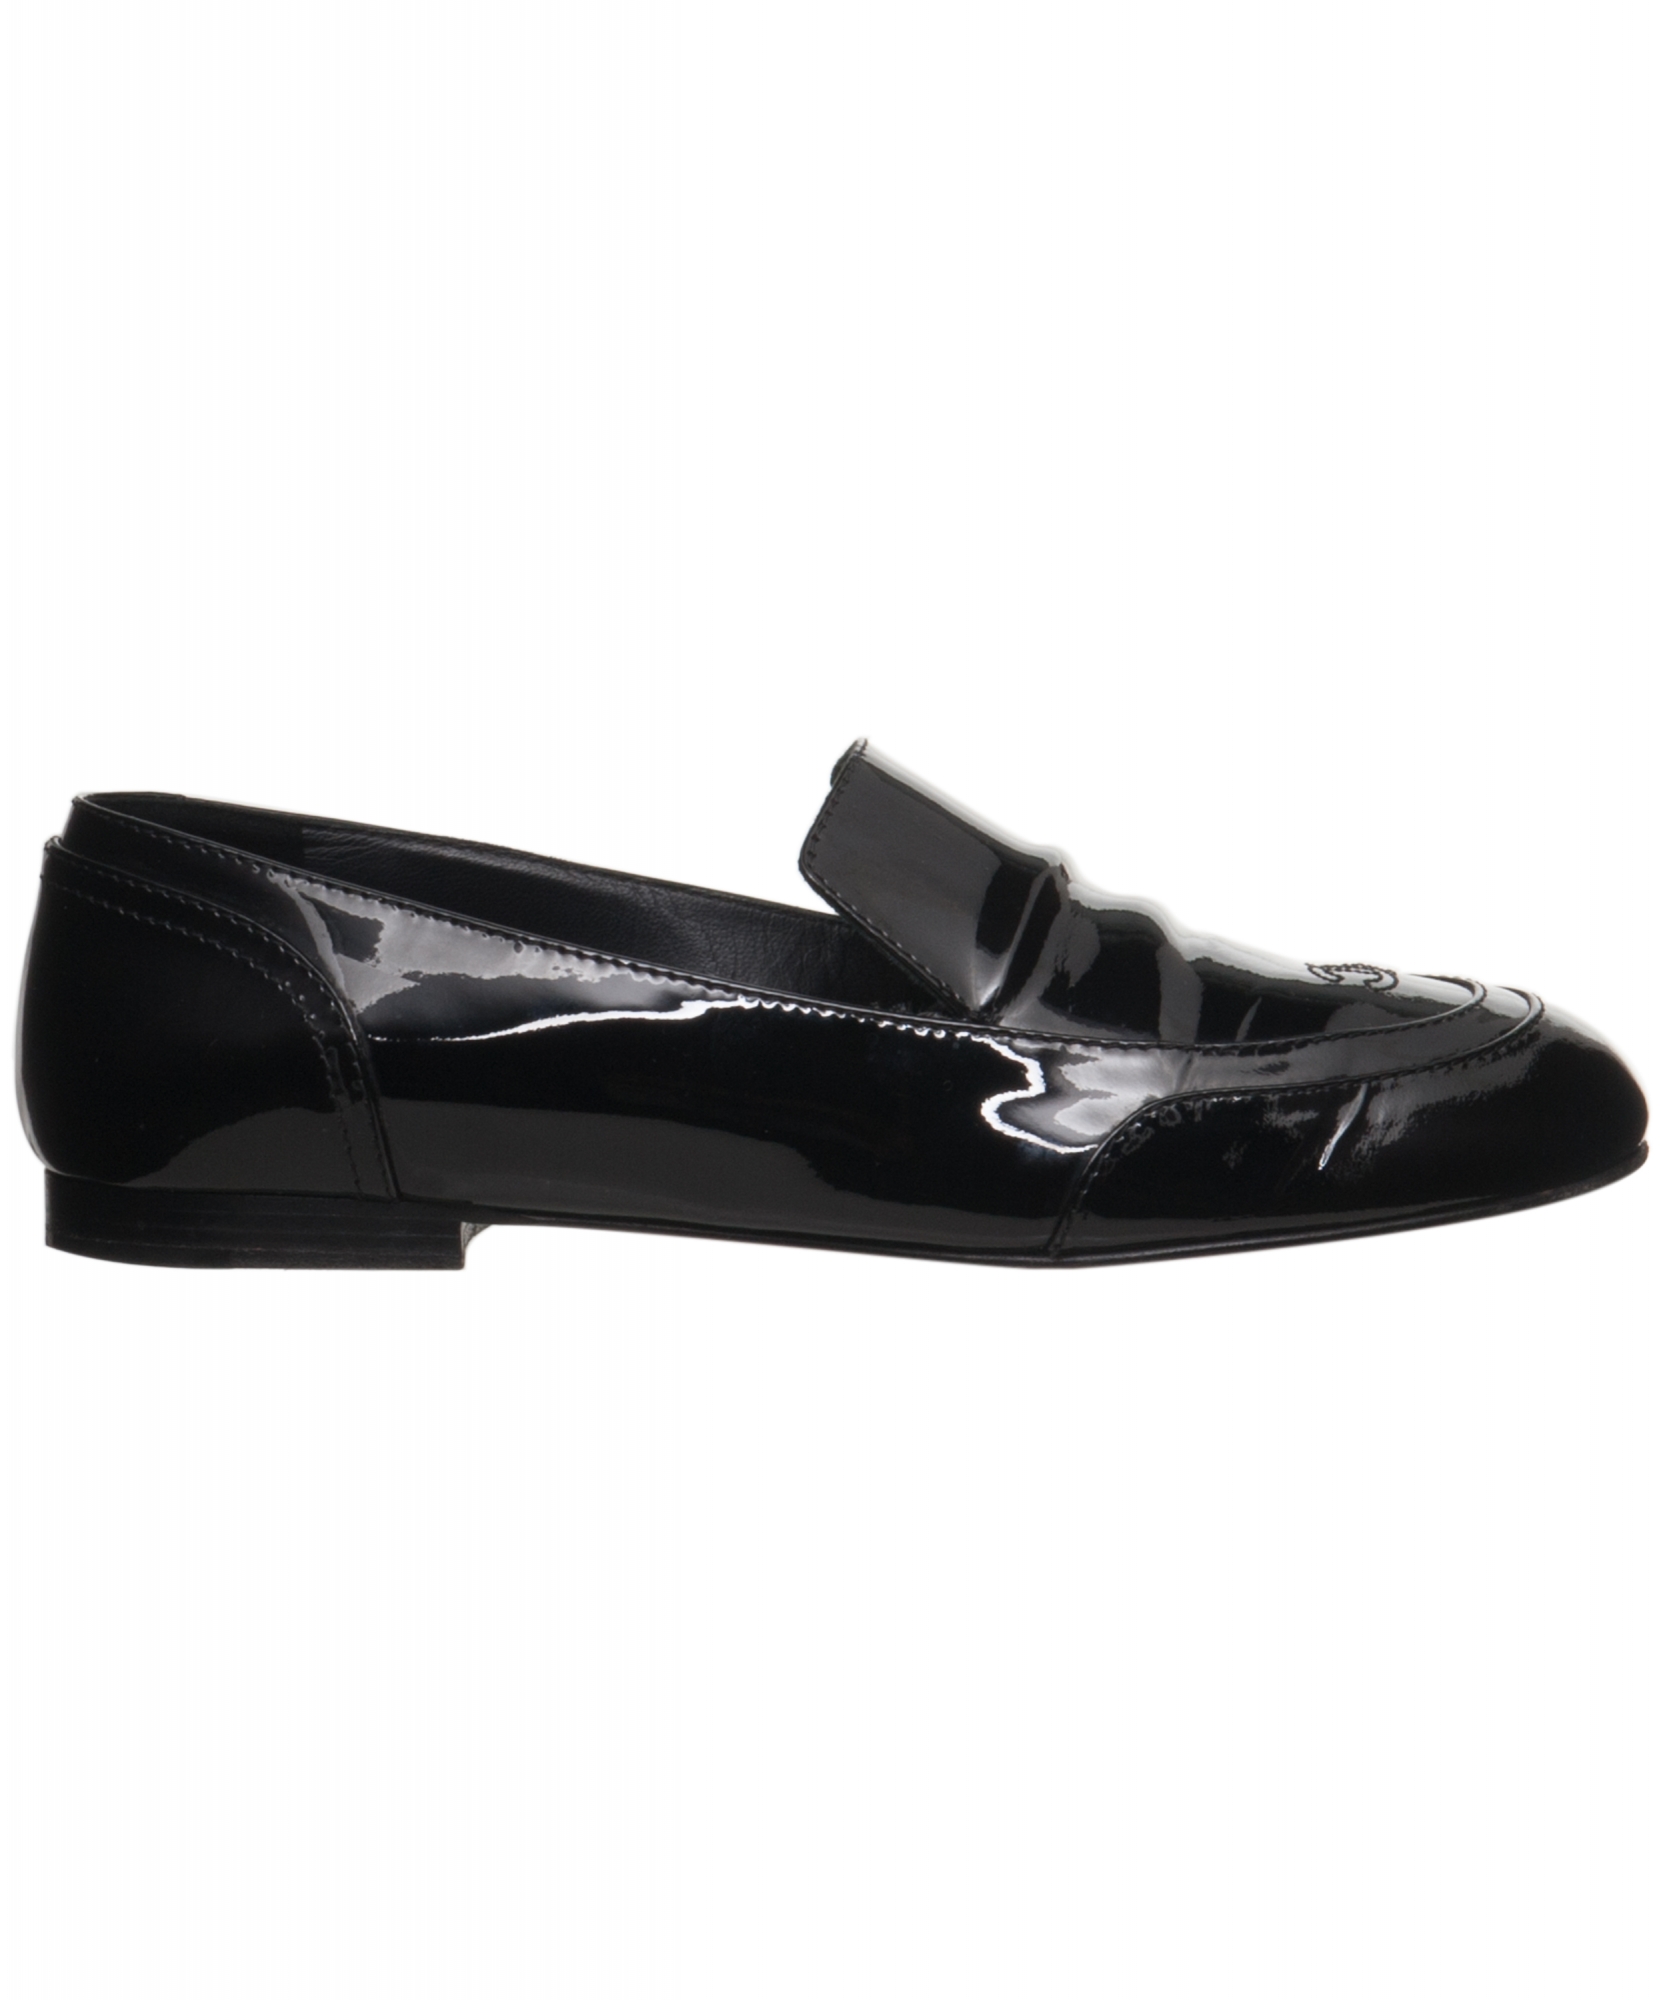 Chanel Patent Leather Oxford Loafer Moccasin Flats - Chanel | ArtListings